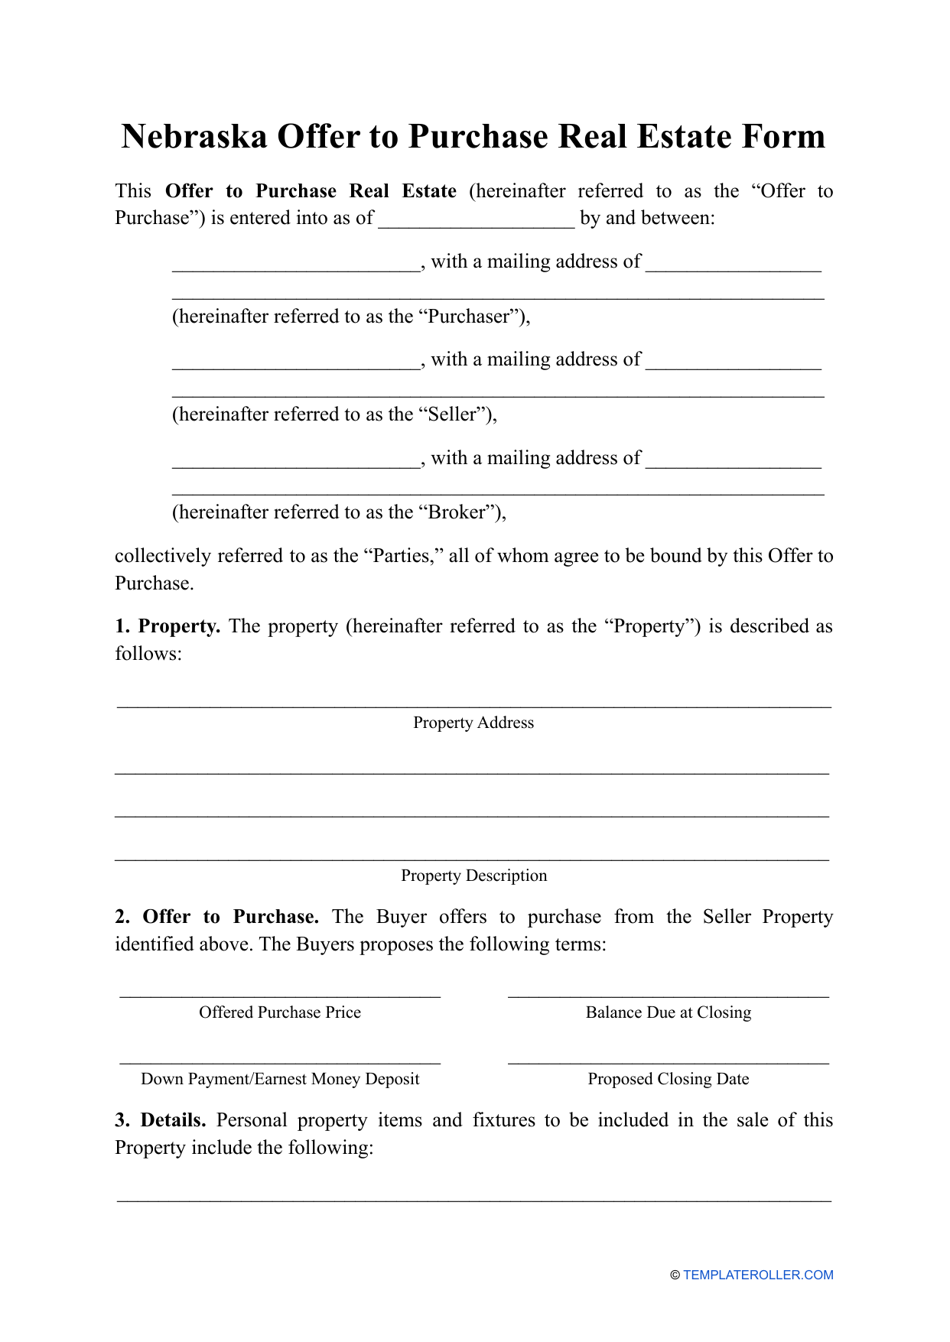 Offer to Purchase Real Estate Form - Nebraska, Page 1